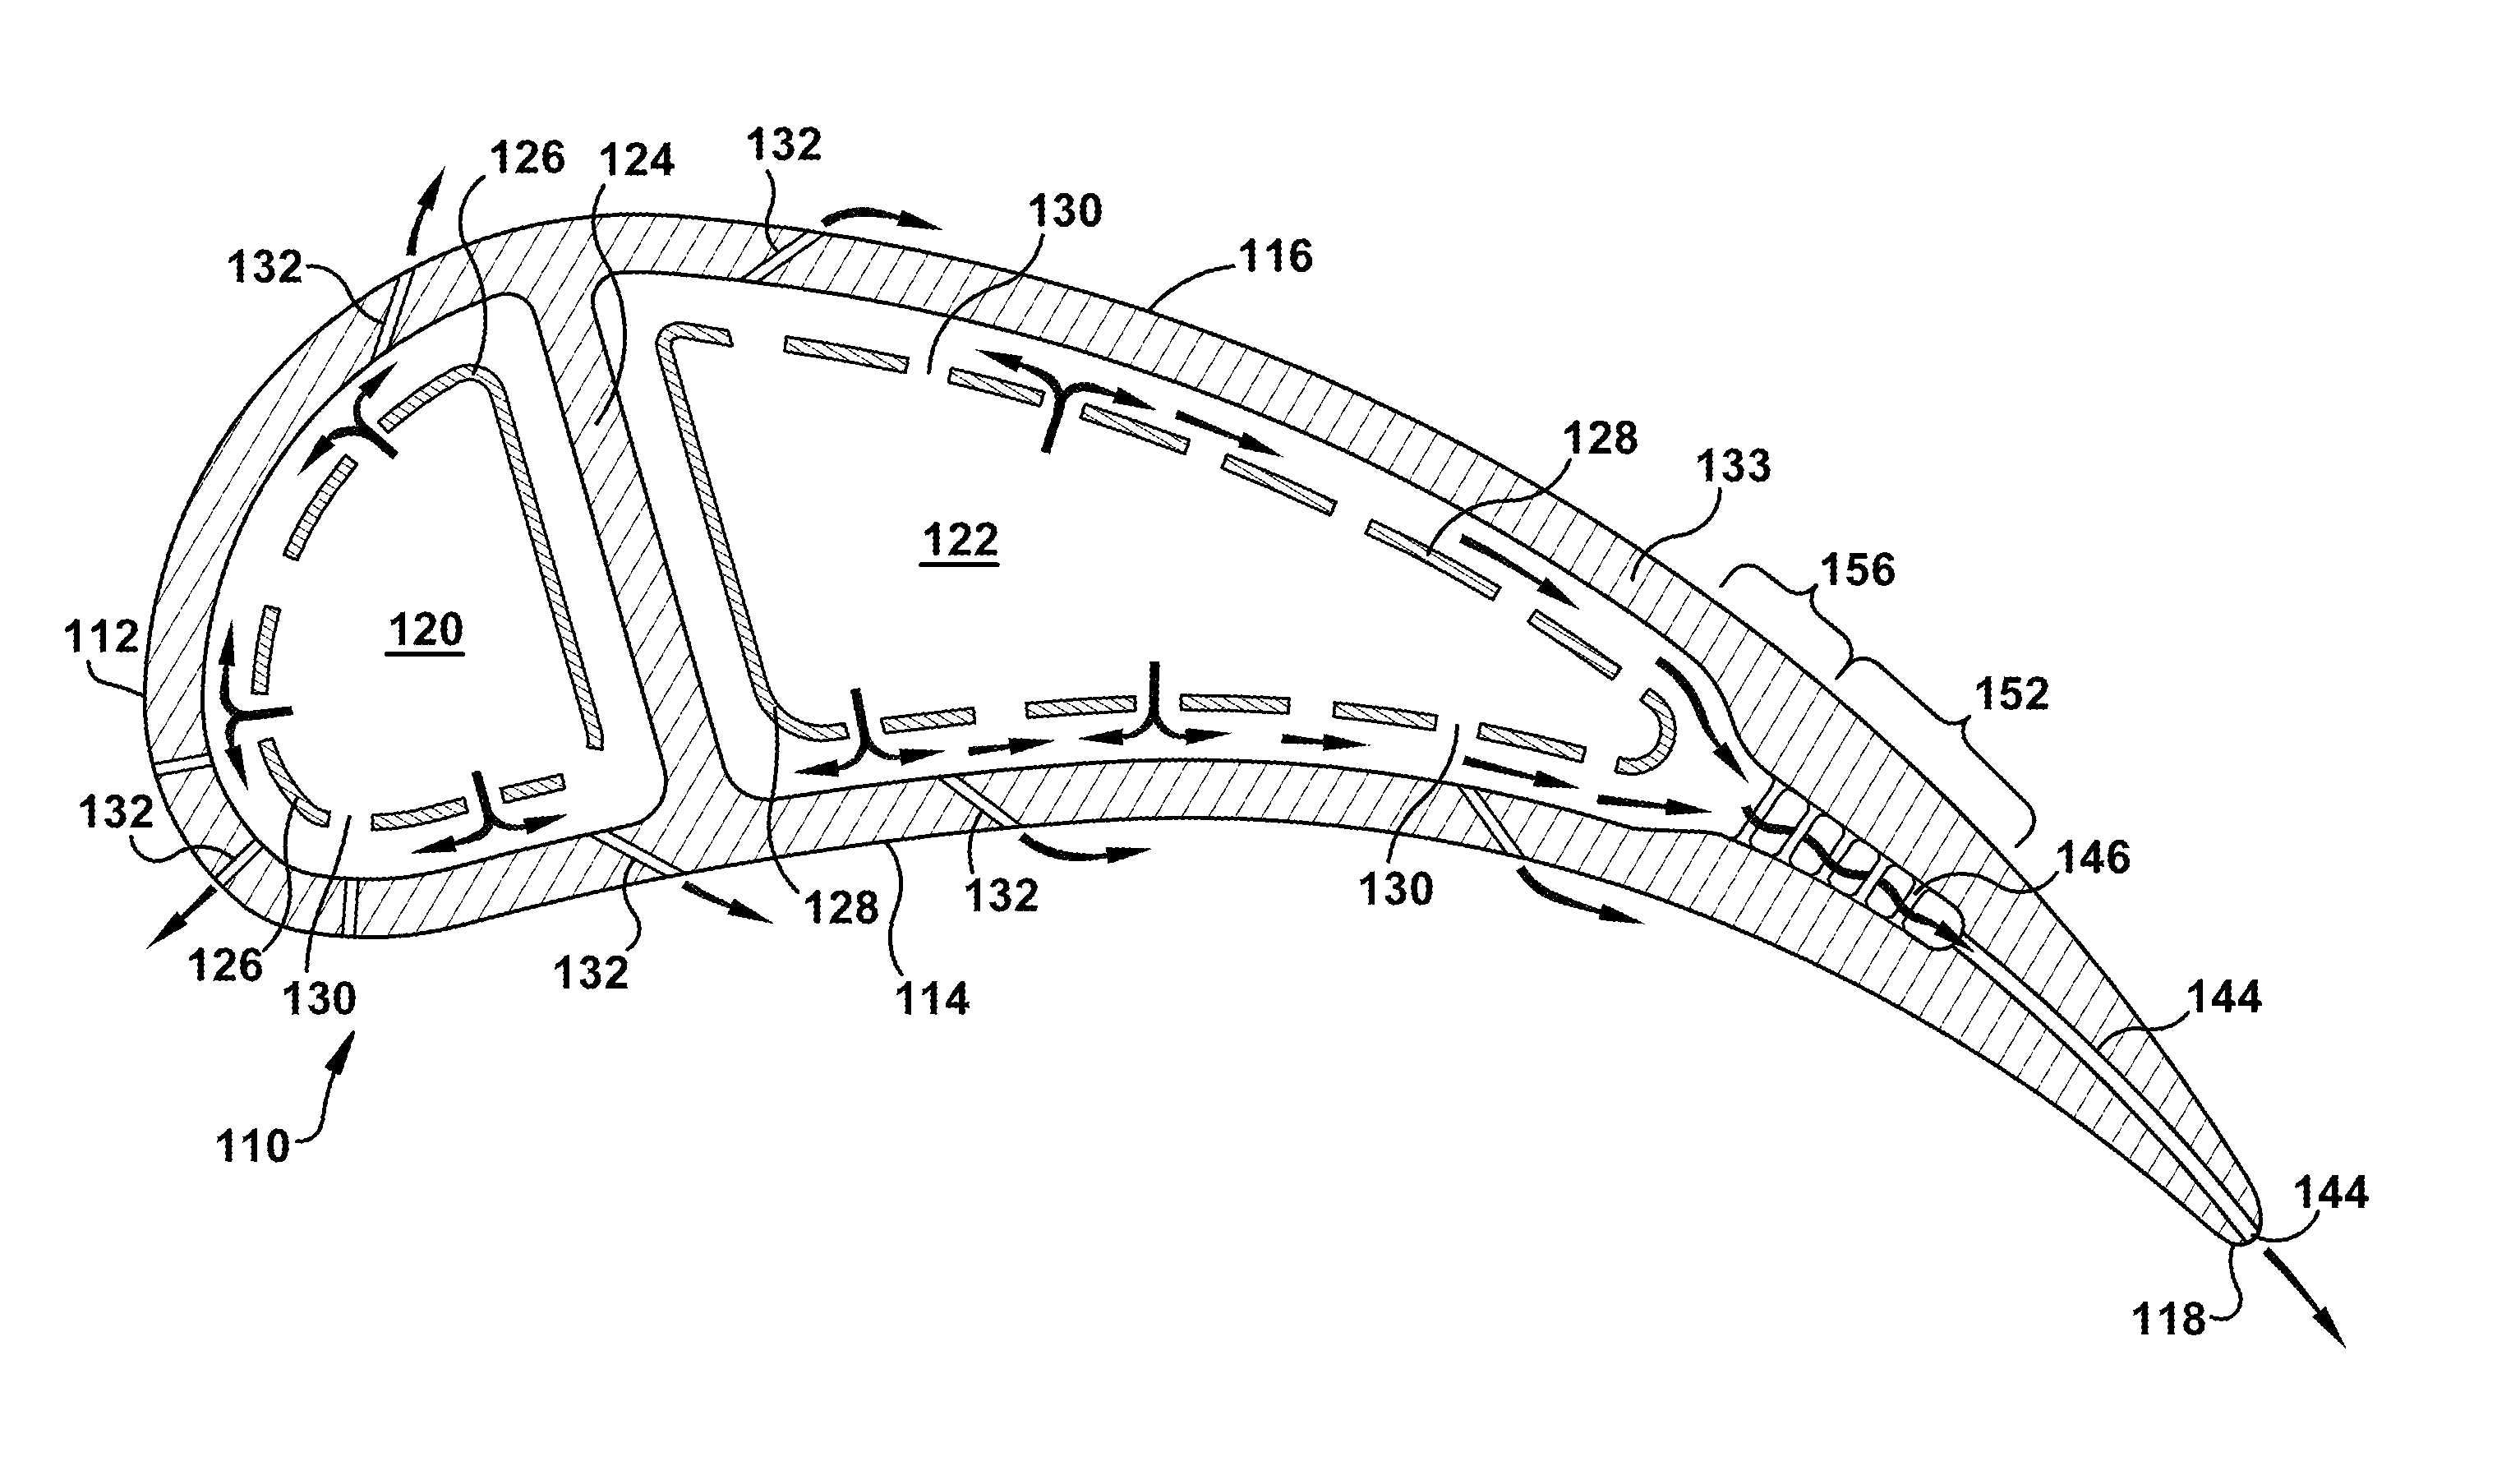 Turbine blade cooling with a hollow airfoil configured to minimize a distance between a pin array section and the trailing edge of the air foil